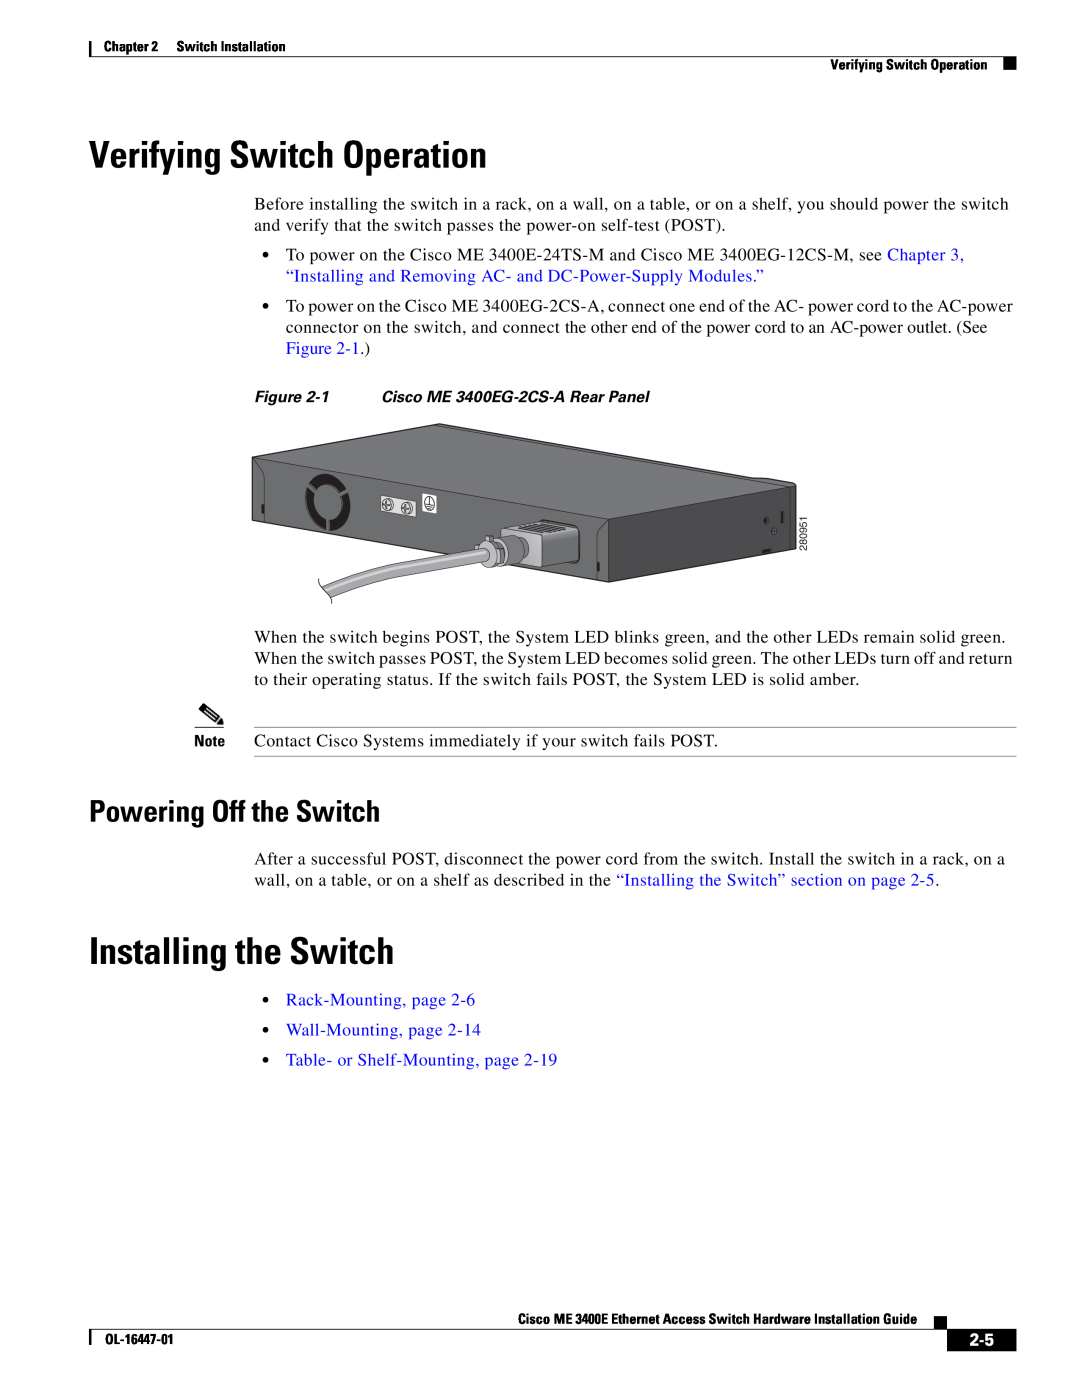 Cisco Systems OL-16447-01 manual Verifying Switch Operation, Installing the Switch, Powering Off the Switch 